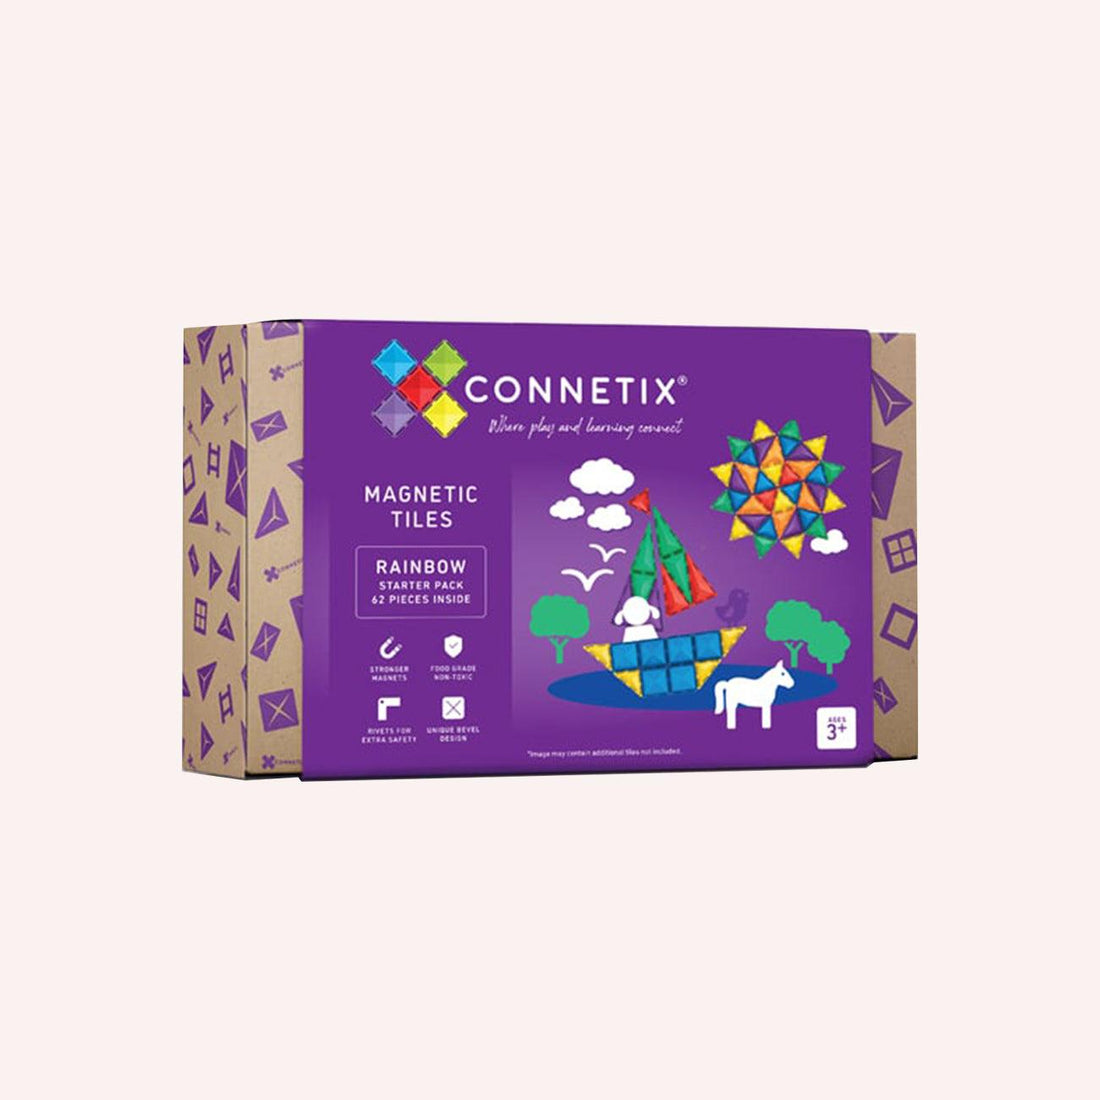 The top 10 FAQs we get asked when it comes to Connetix Magnetic Tiles!